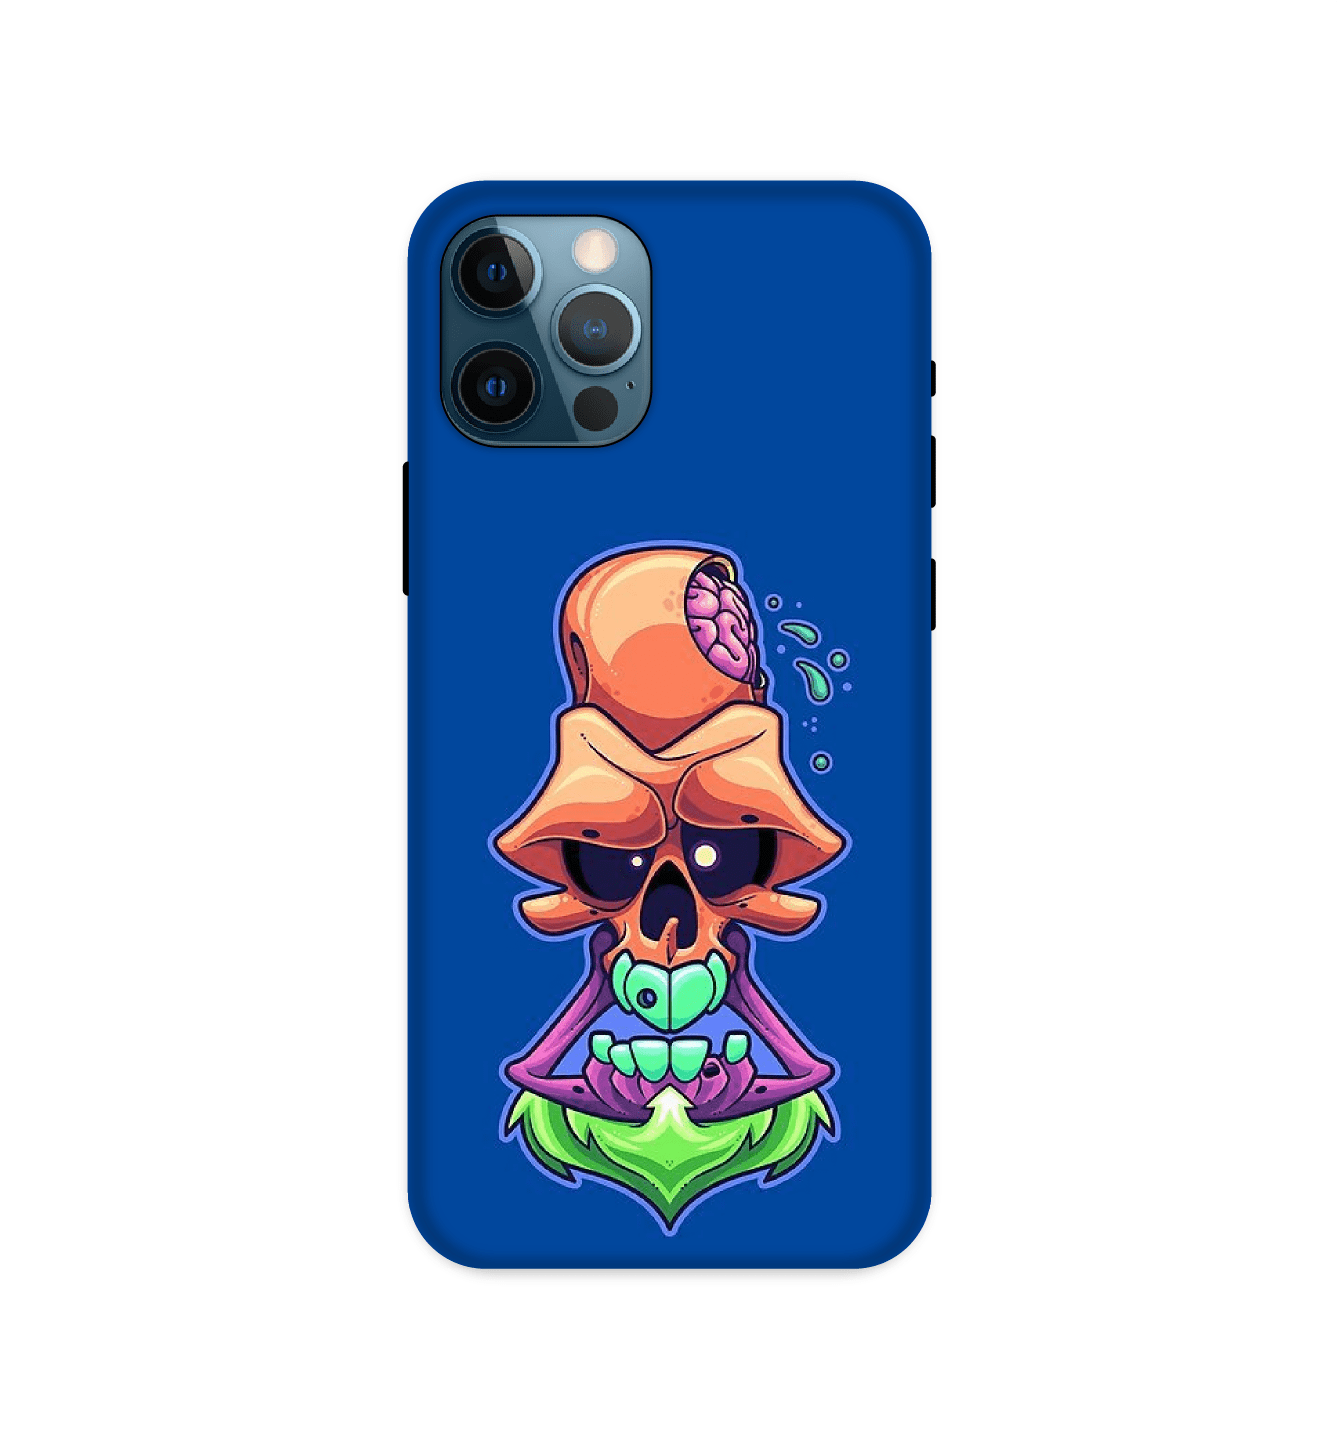 Psychedelic Skull - Hard Cases For iPhone Models